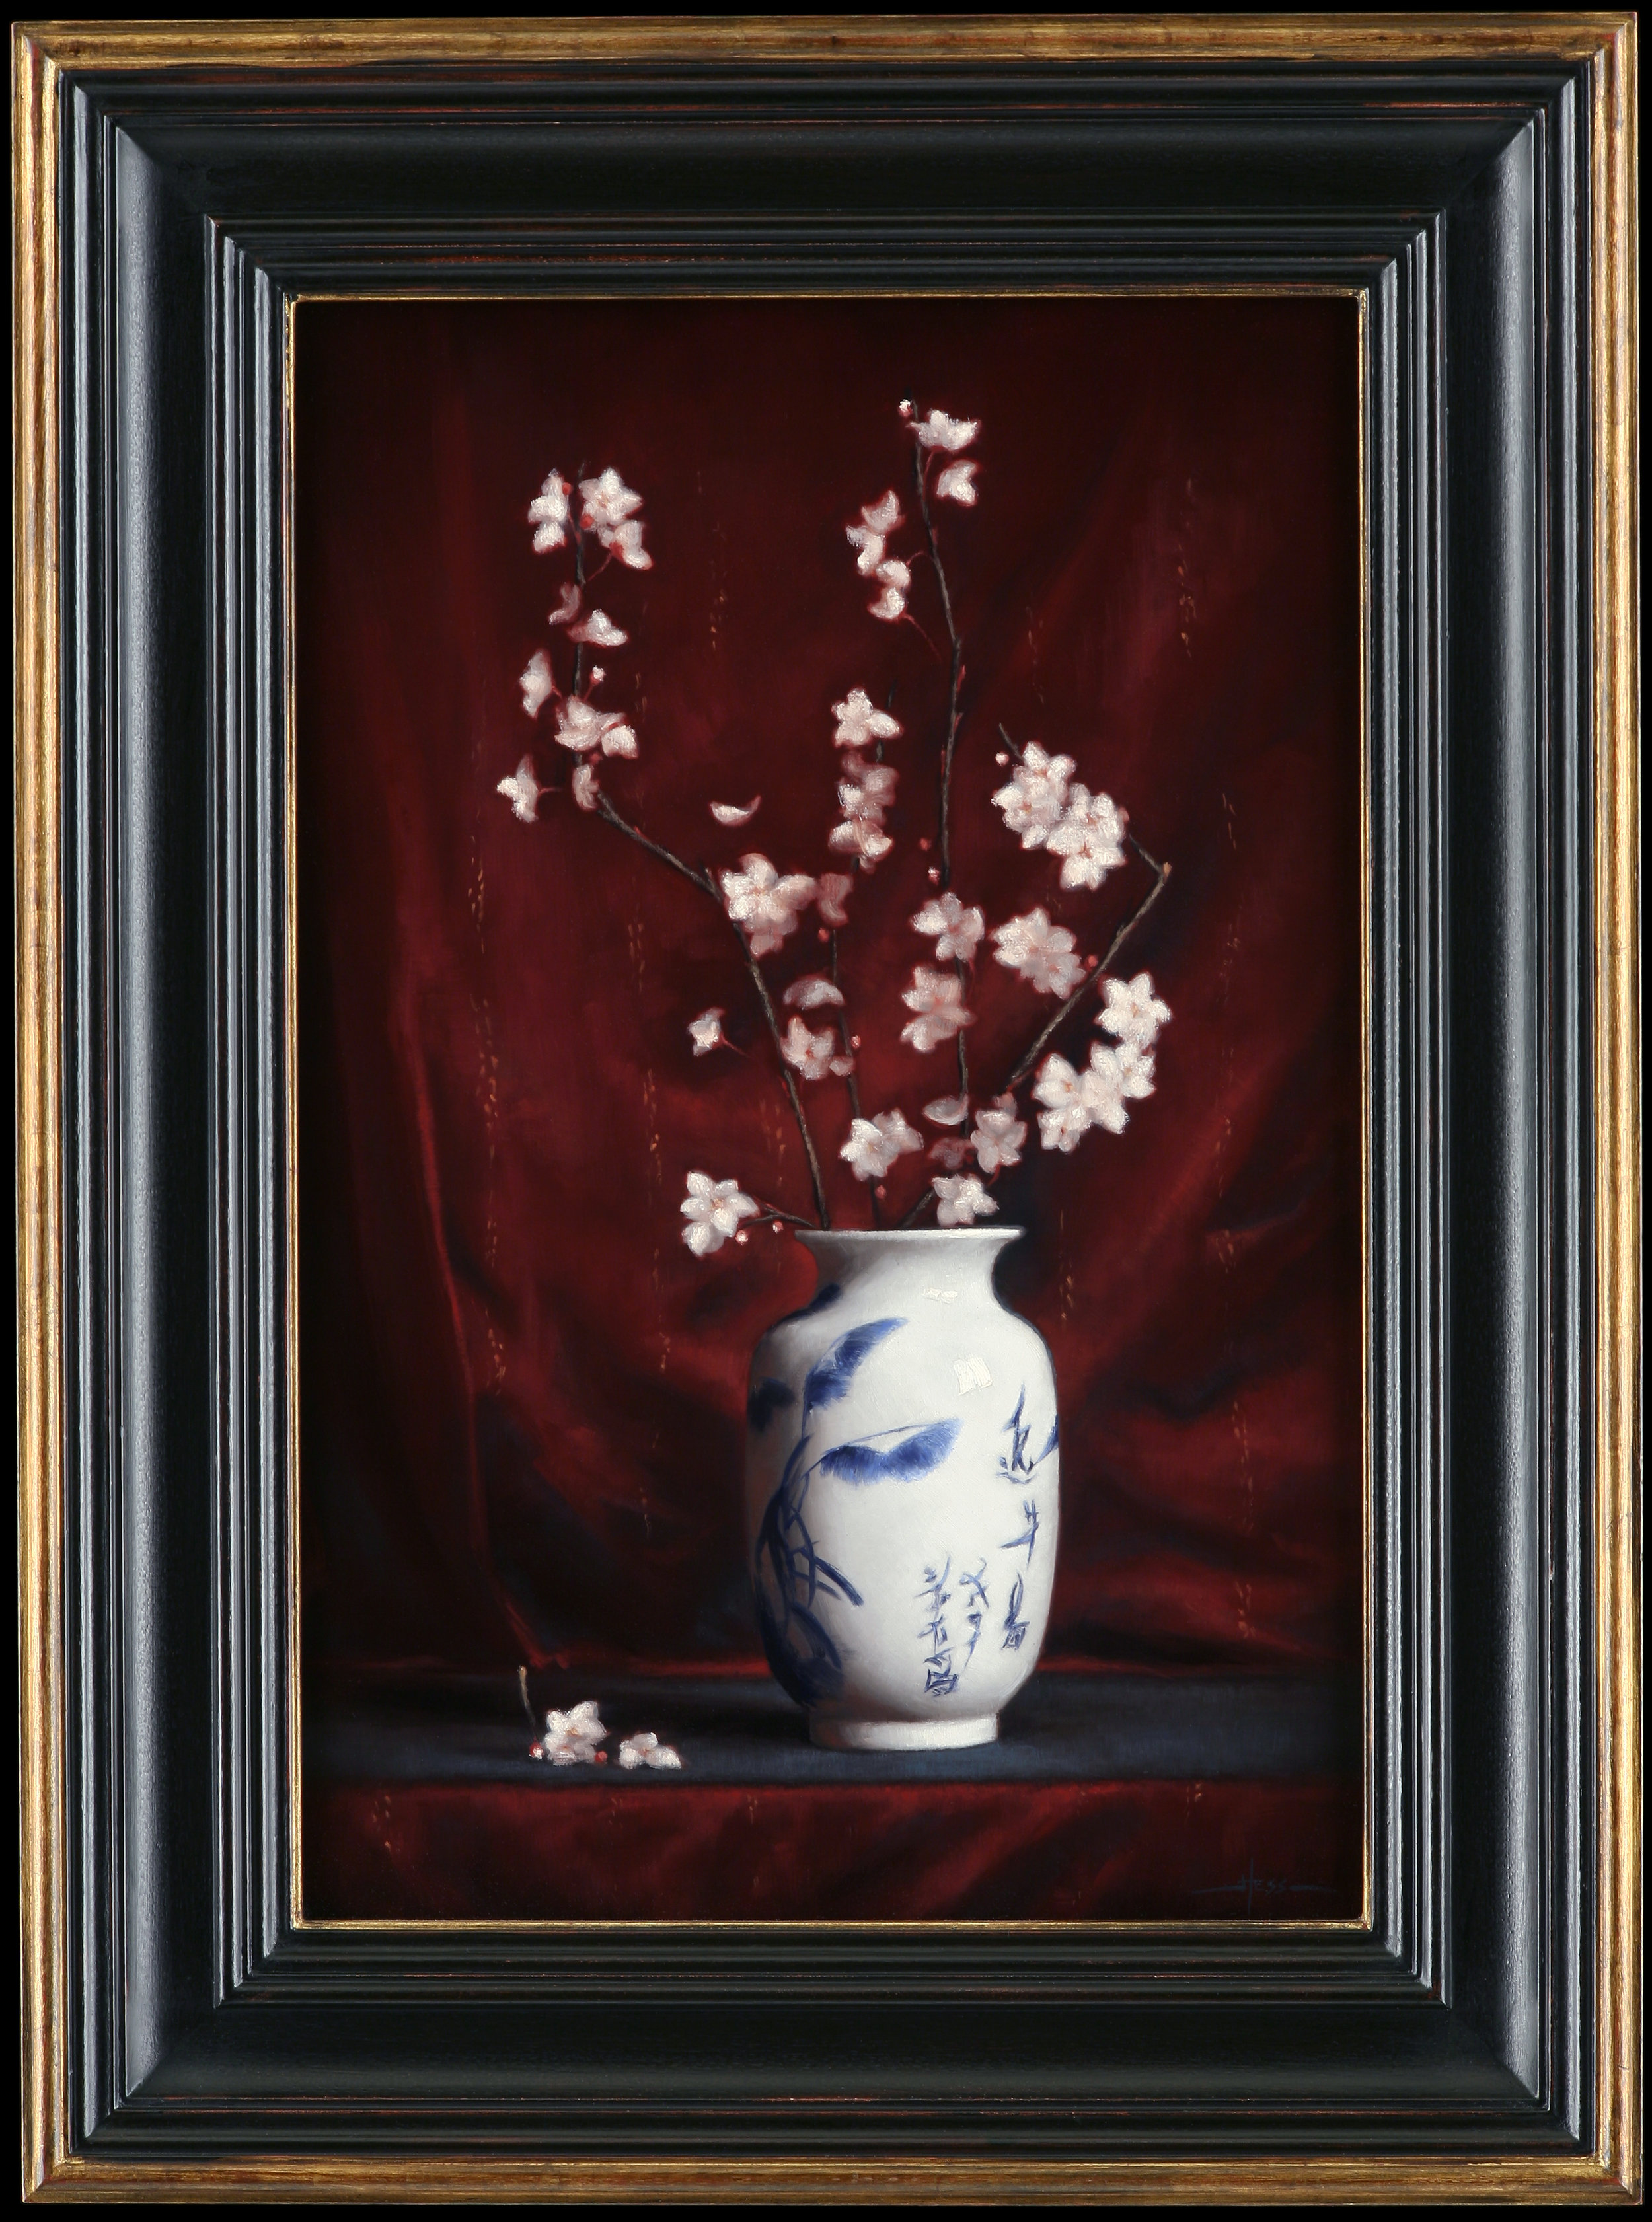 Chinese Vase with Almond Blossoms (Frame).jpg